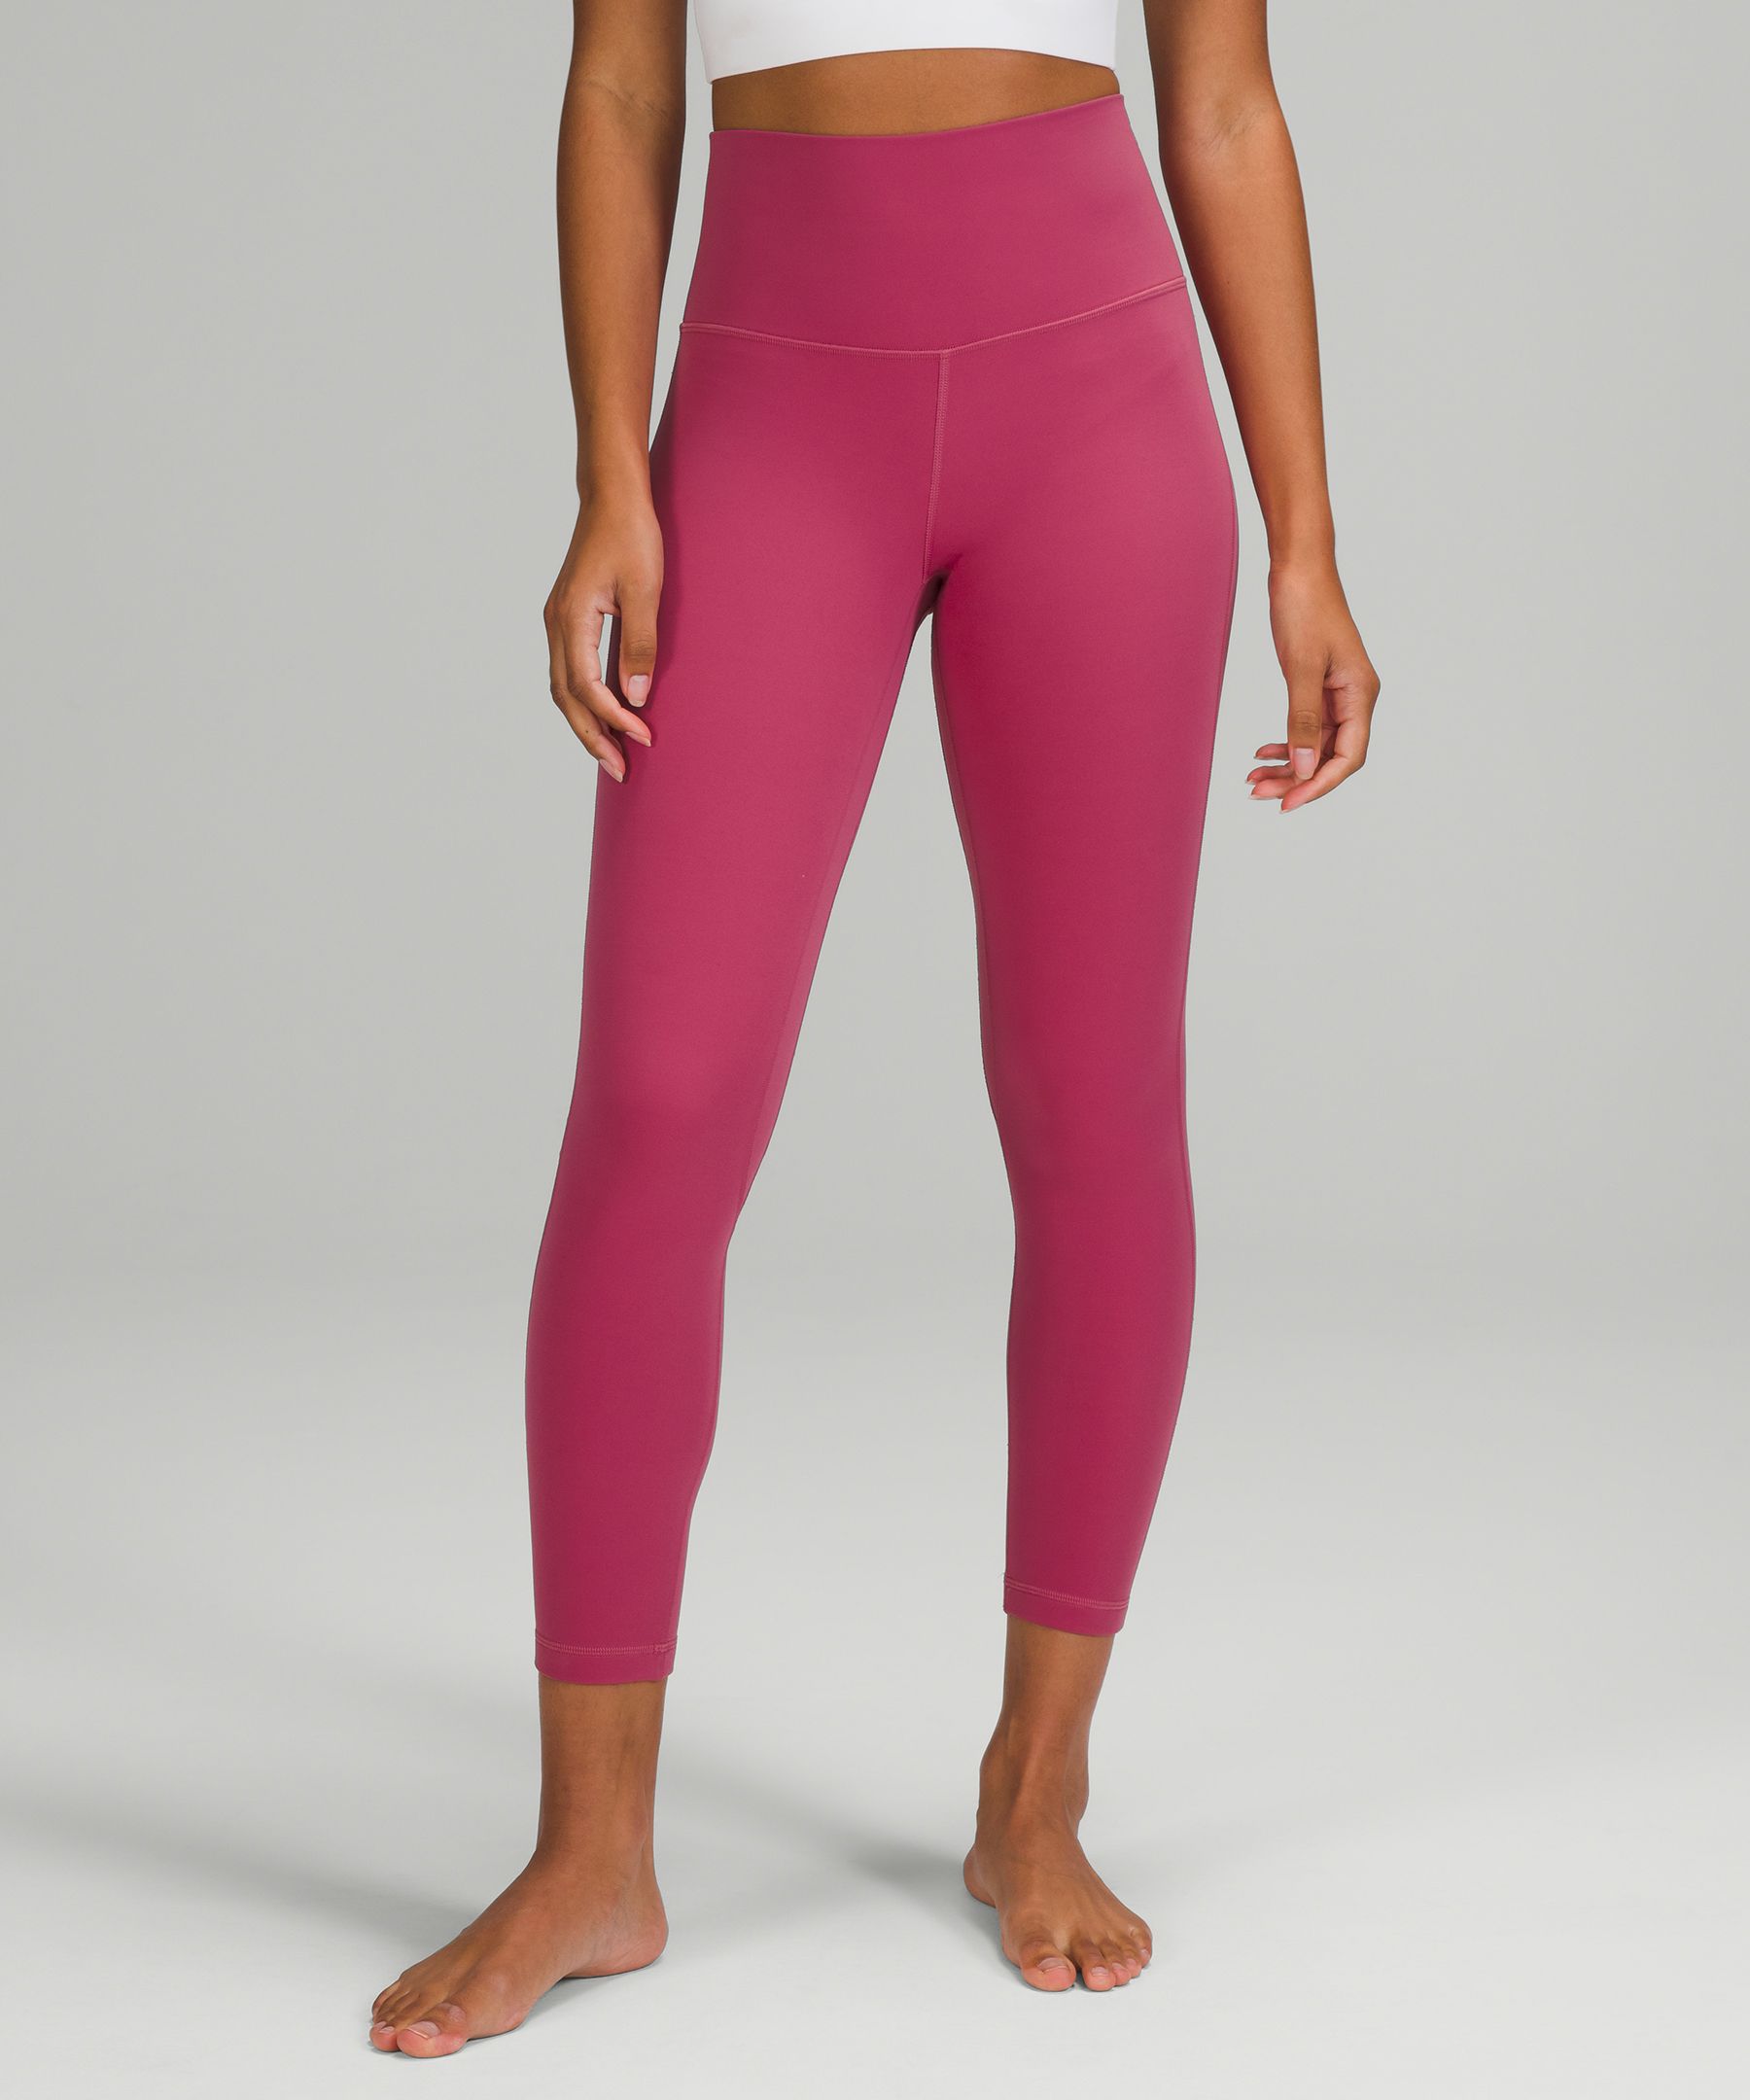 Lululemon Align™ High-rise Pants 25" In Pink Lychee